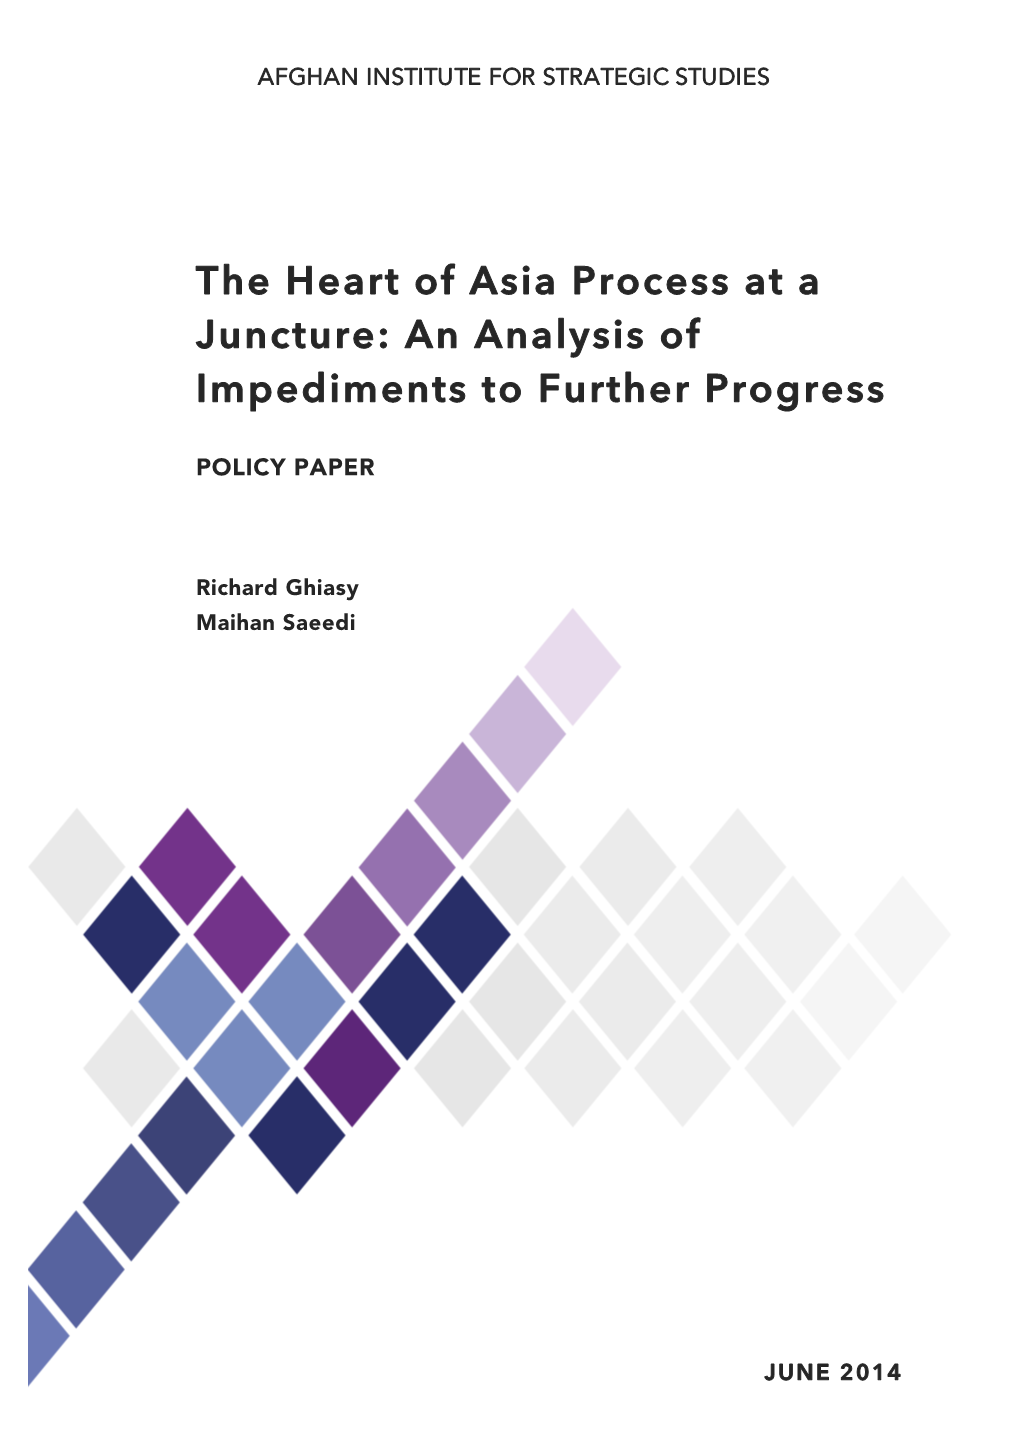 The Heart of Asia Process at a Juncture: an Analysis of Impediments to Further Progress